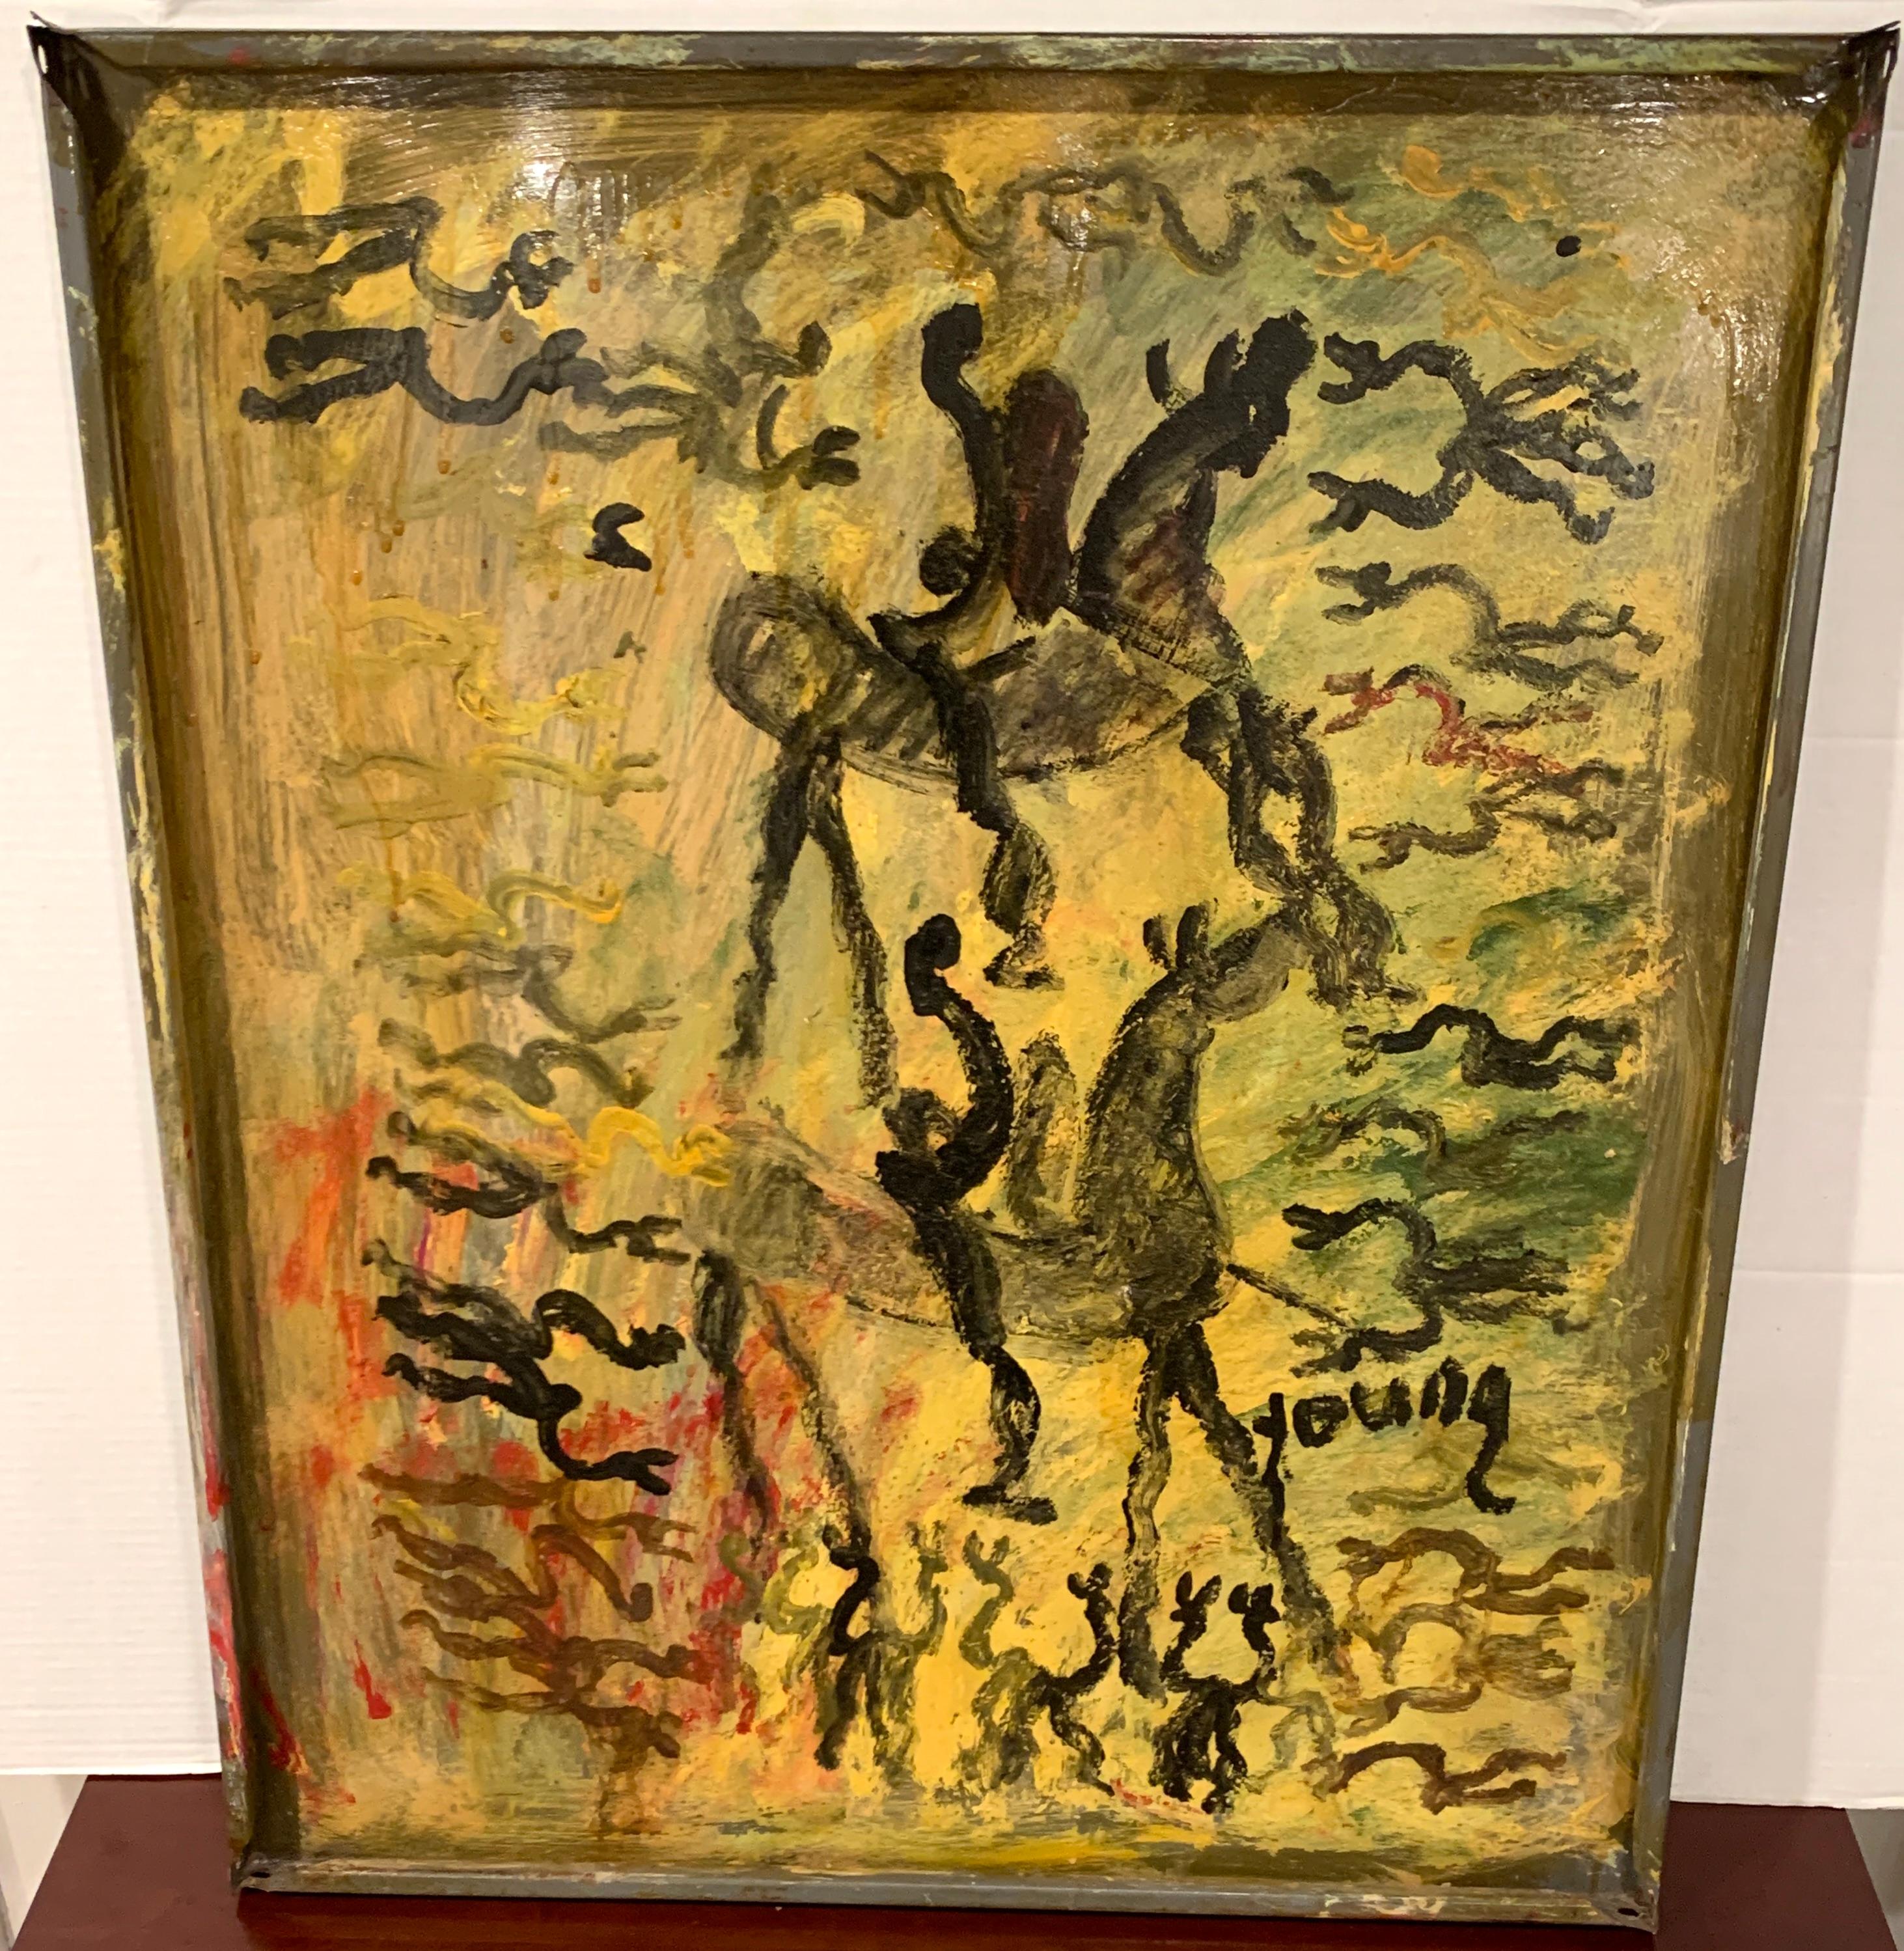 'Freedom Warriors on Horseback' by Purvis Young
USA, circa 1980s
Purvis Young,'Freedom Warriors on Horseback, a large work  painted on air handler metal side panel or the like, with a 1.5